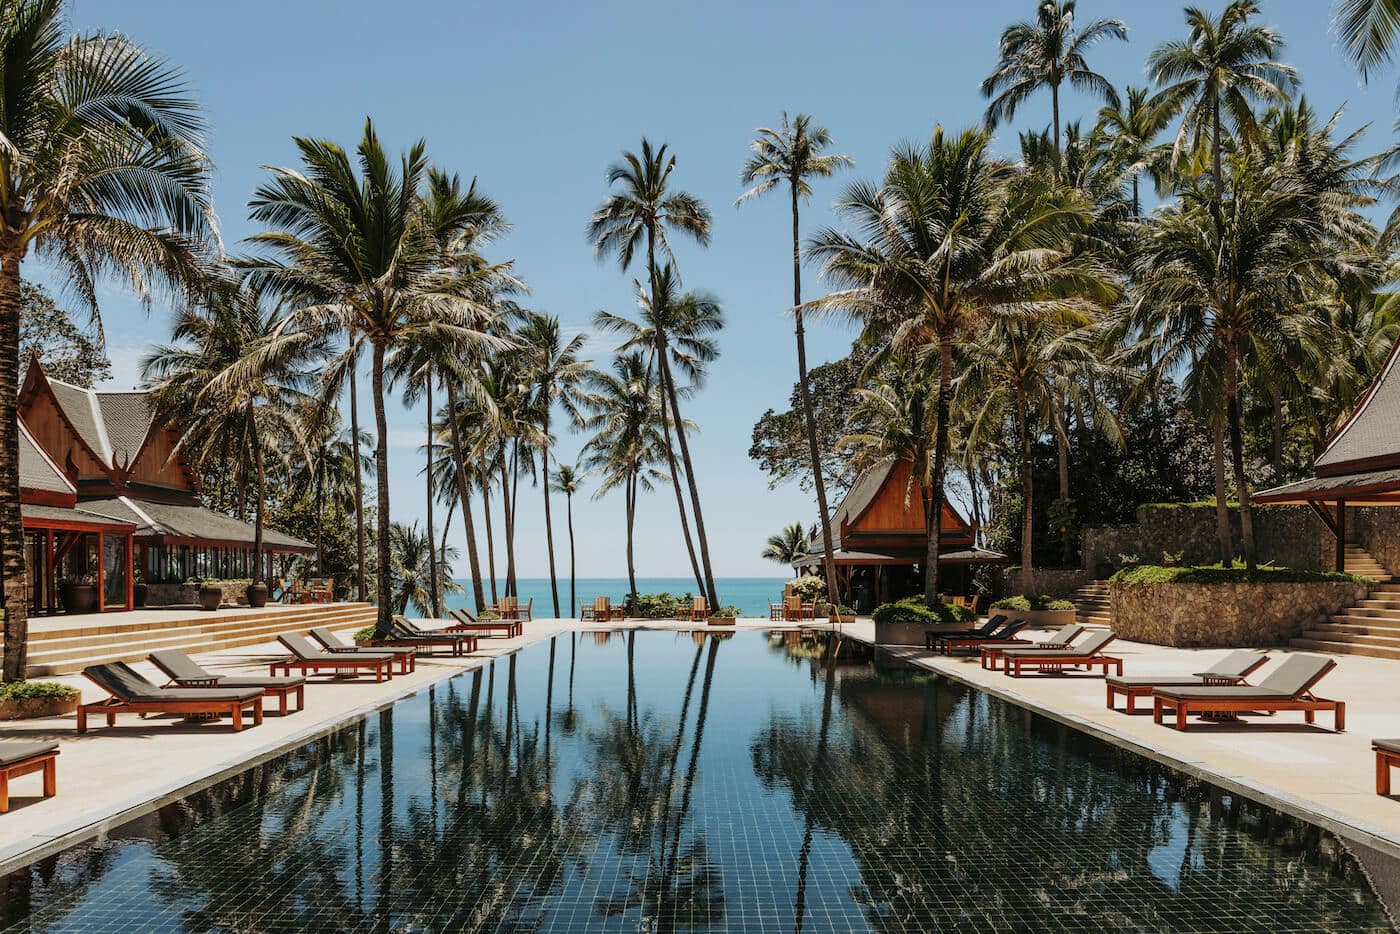 best luxury wellness retreats in thailand, best wellness retreats in phuket, best wellness retreats in koh samui, healthy holiday, fitness retreat, weight loss, detox, asia